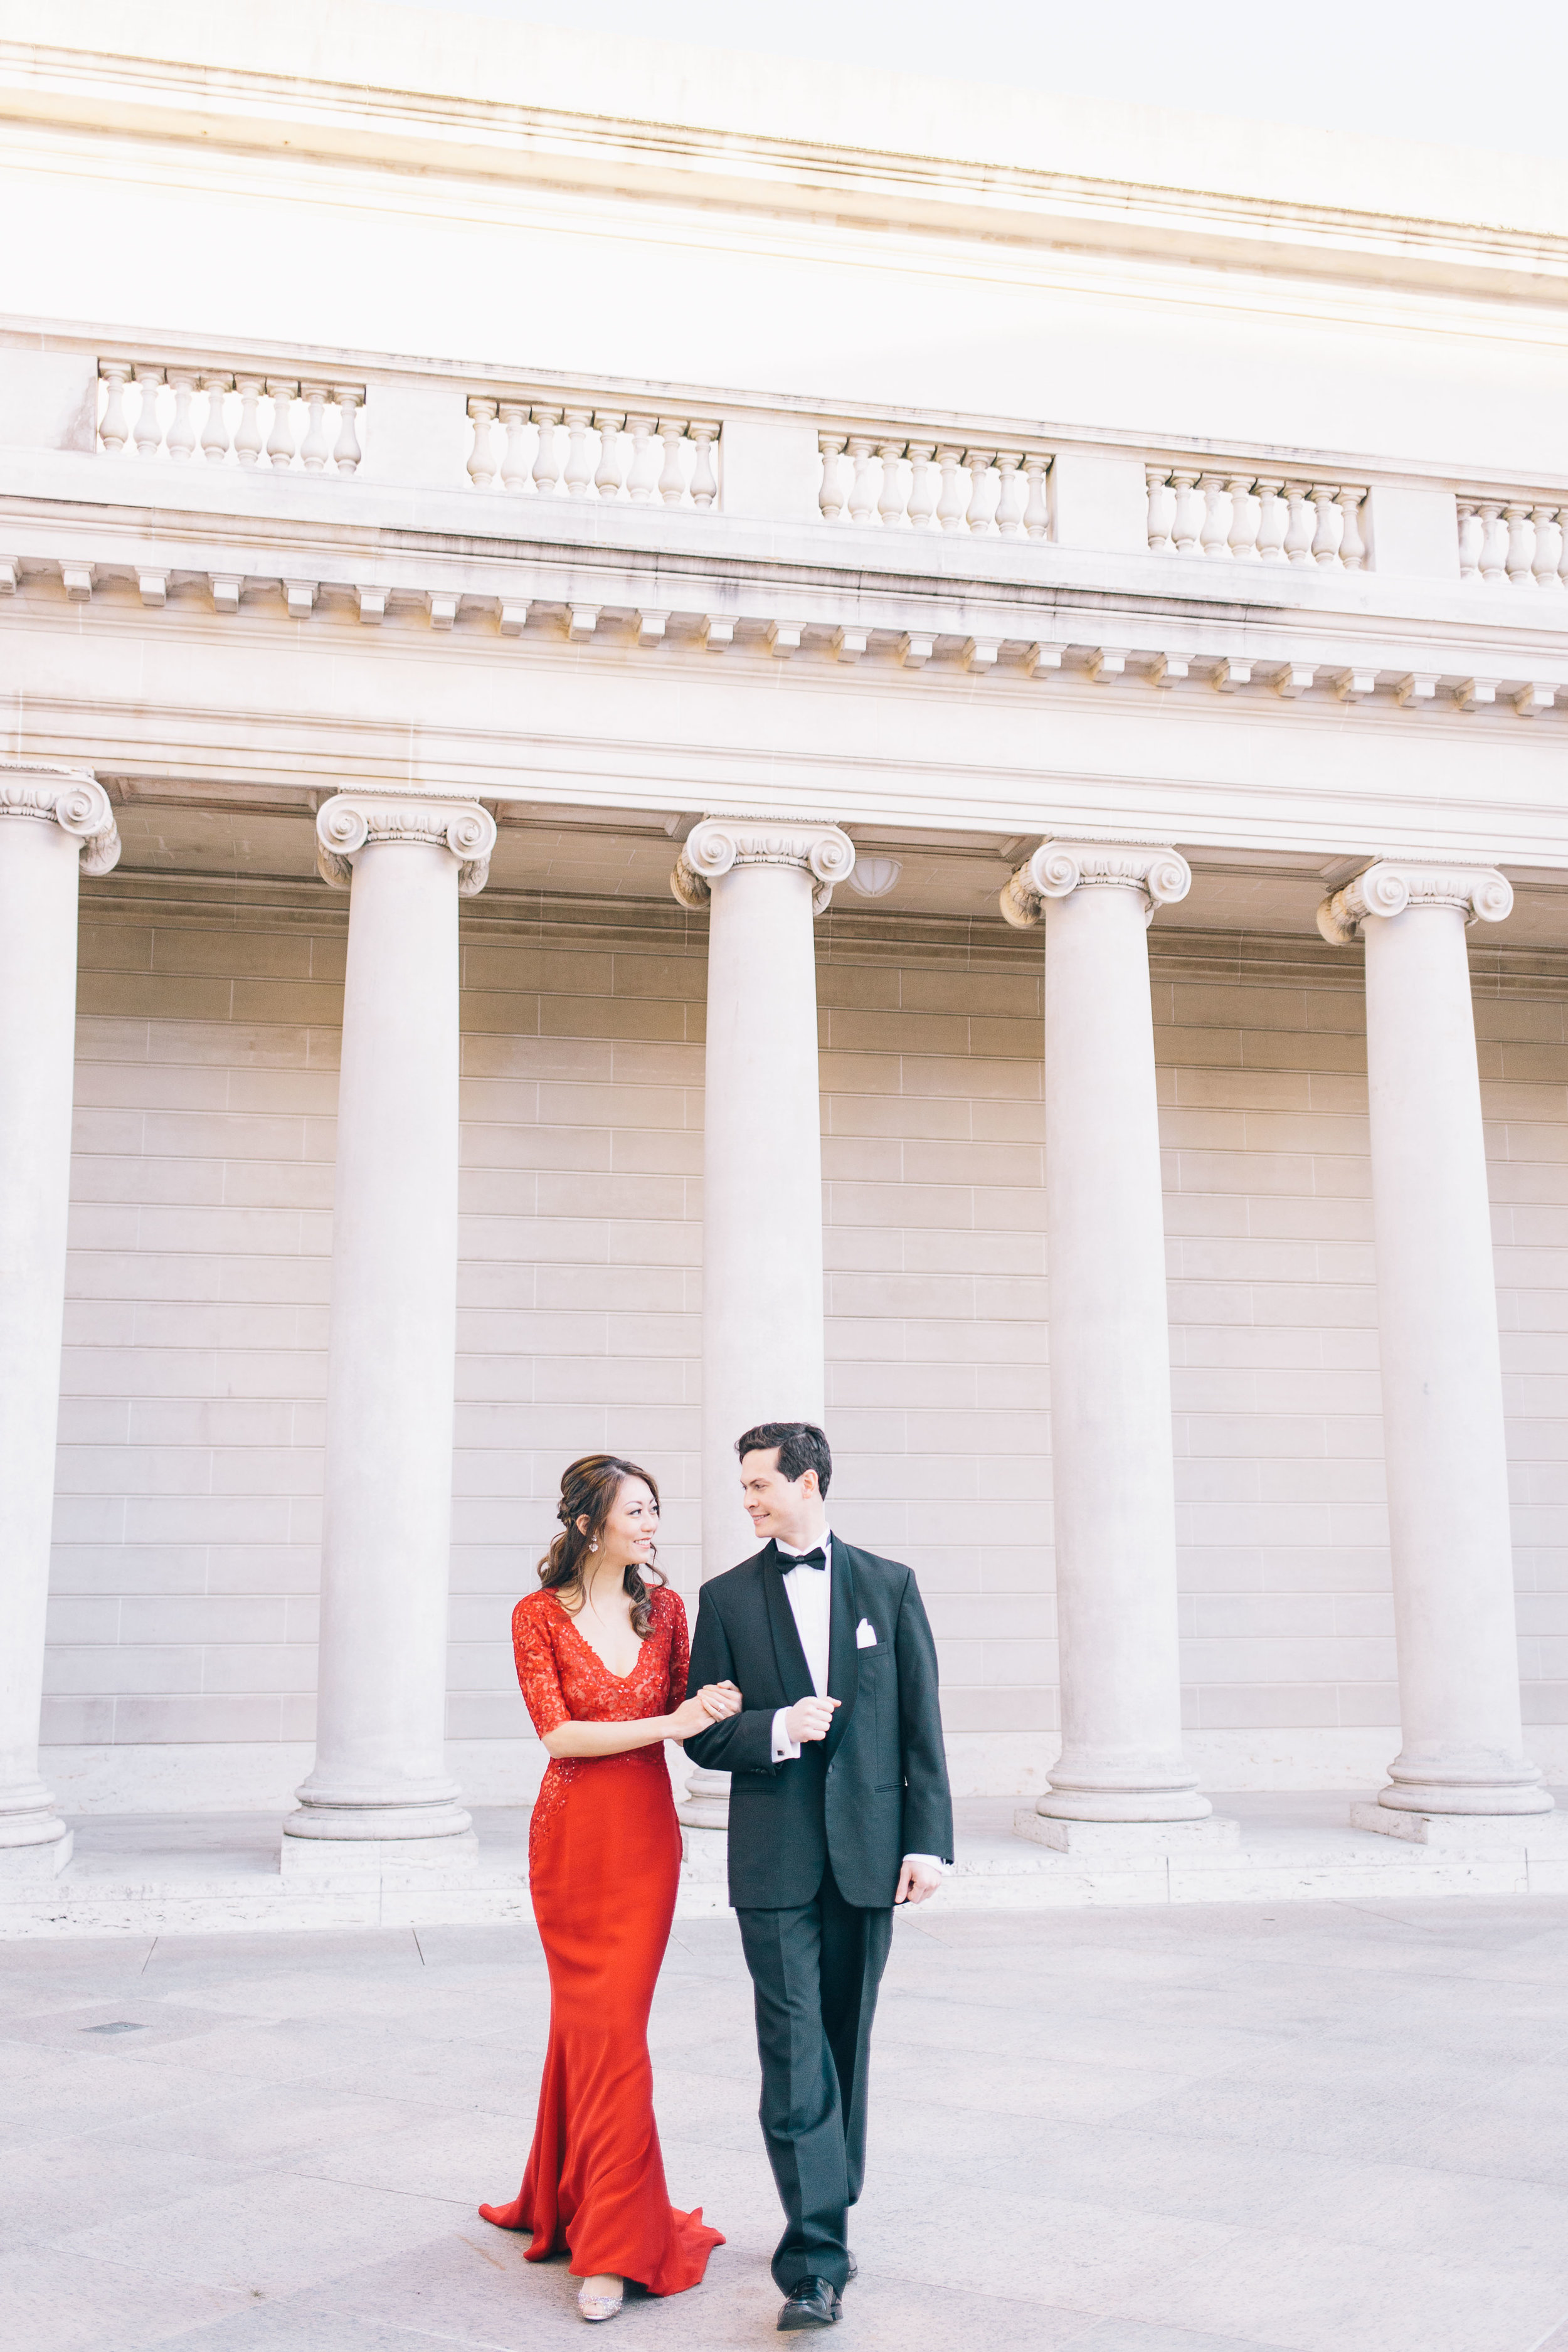 Legion of Honor Engagement Photos by JBJ Pictures - Best Locations for Engagement Photos in SF (5).jpg